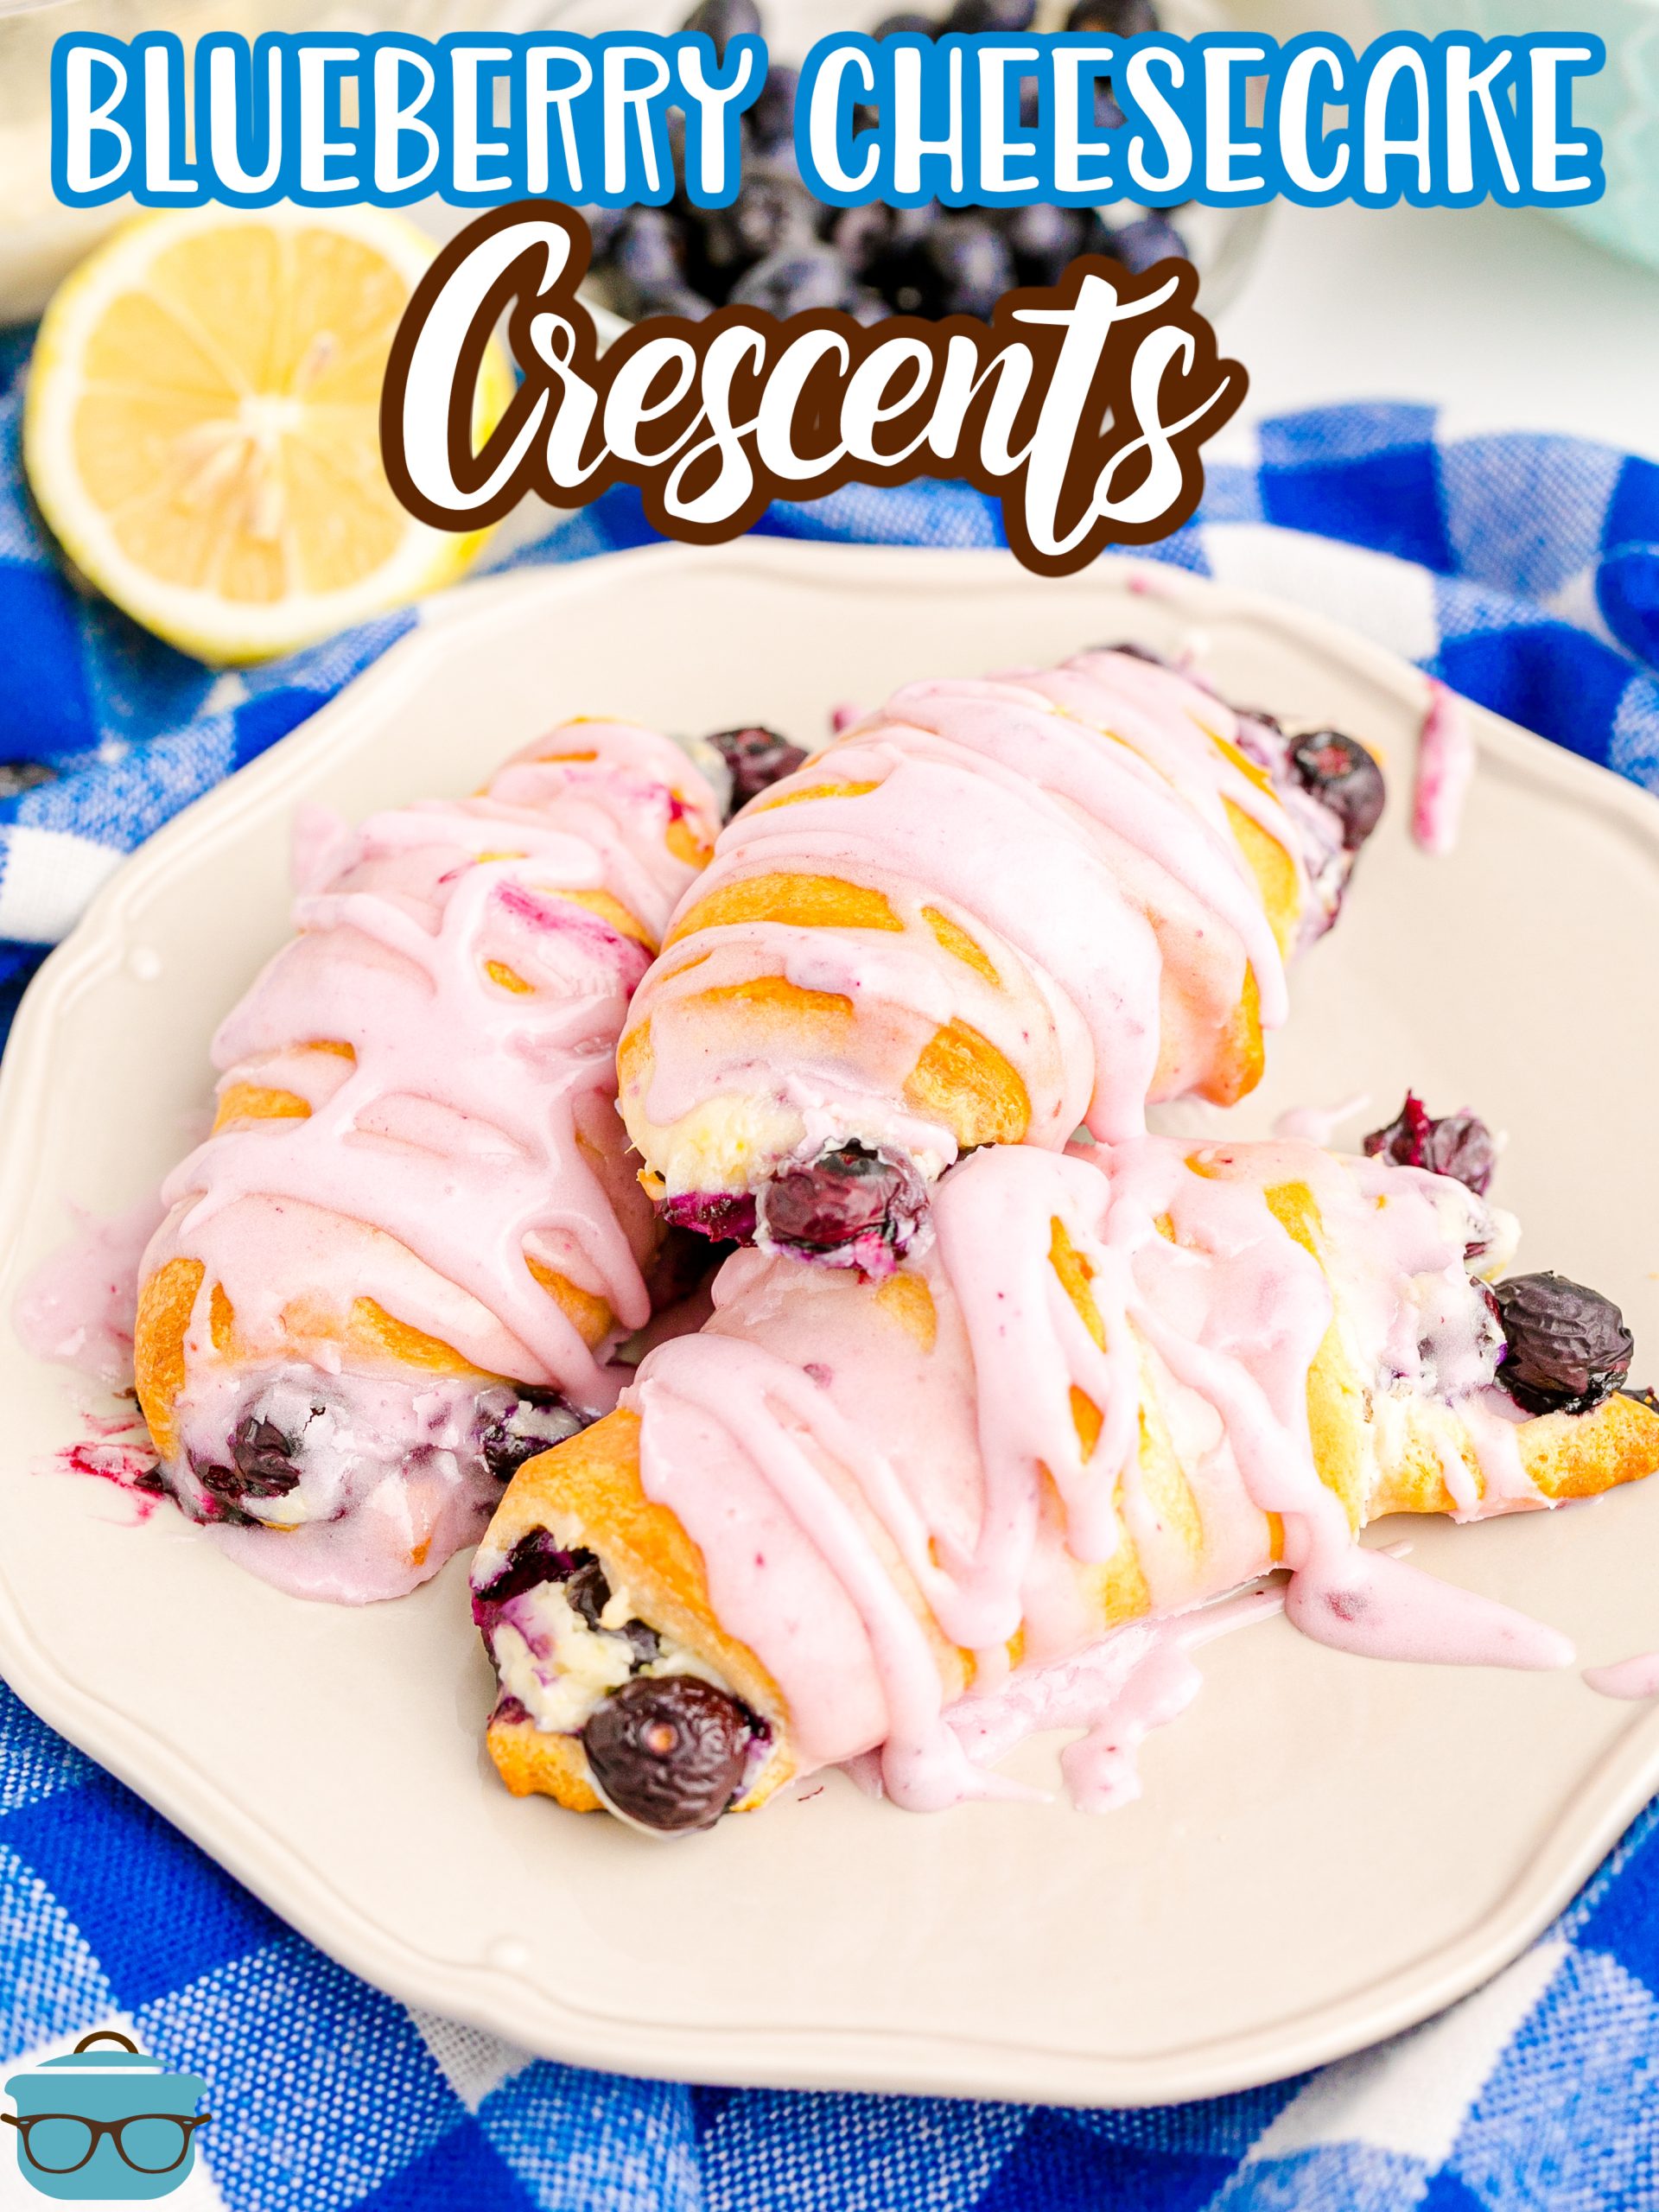 A plate of delicious Blueberry Cheesecake Crescent Rolls for dessert.